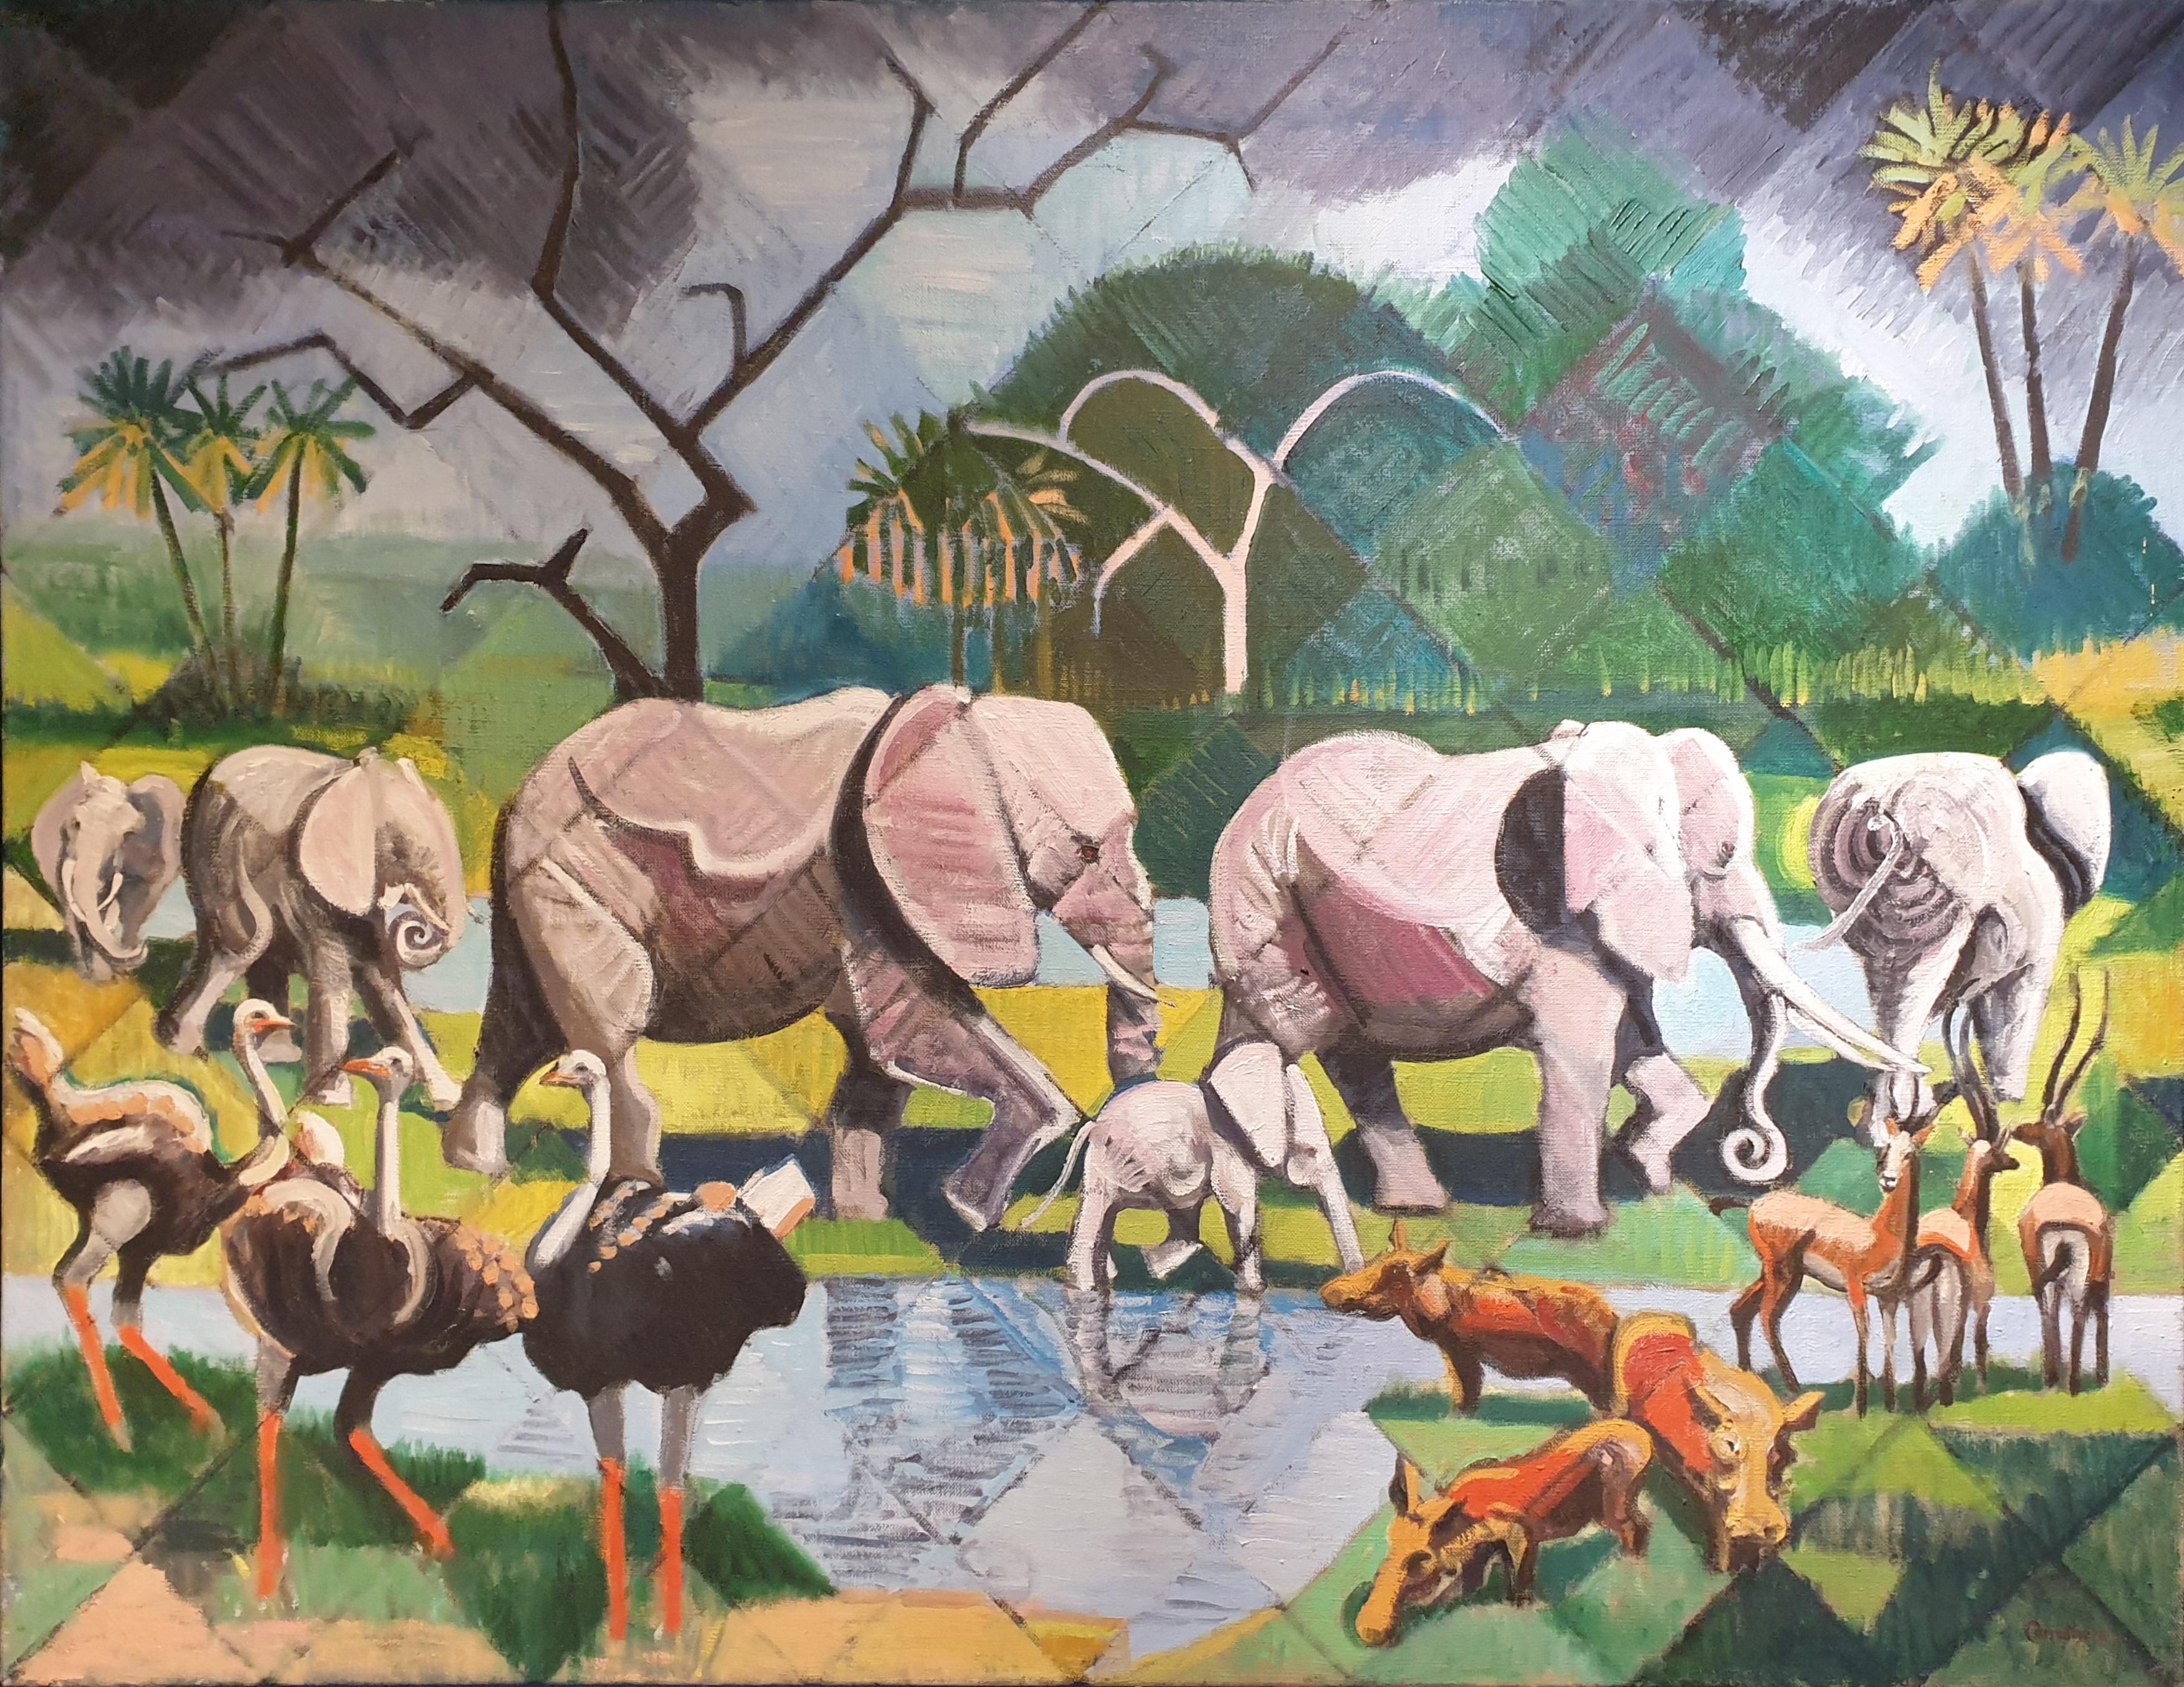 Derek Carruthers Landscape Painting - Large Scale Surrealist Oil on Canvas, 'At the Watering Hole'.